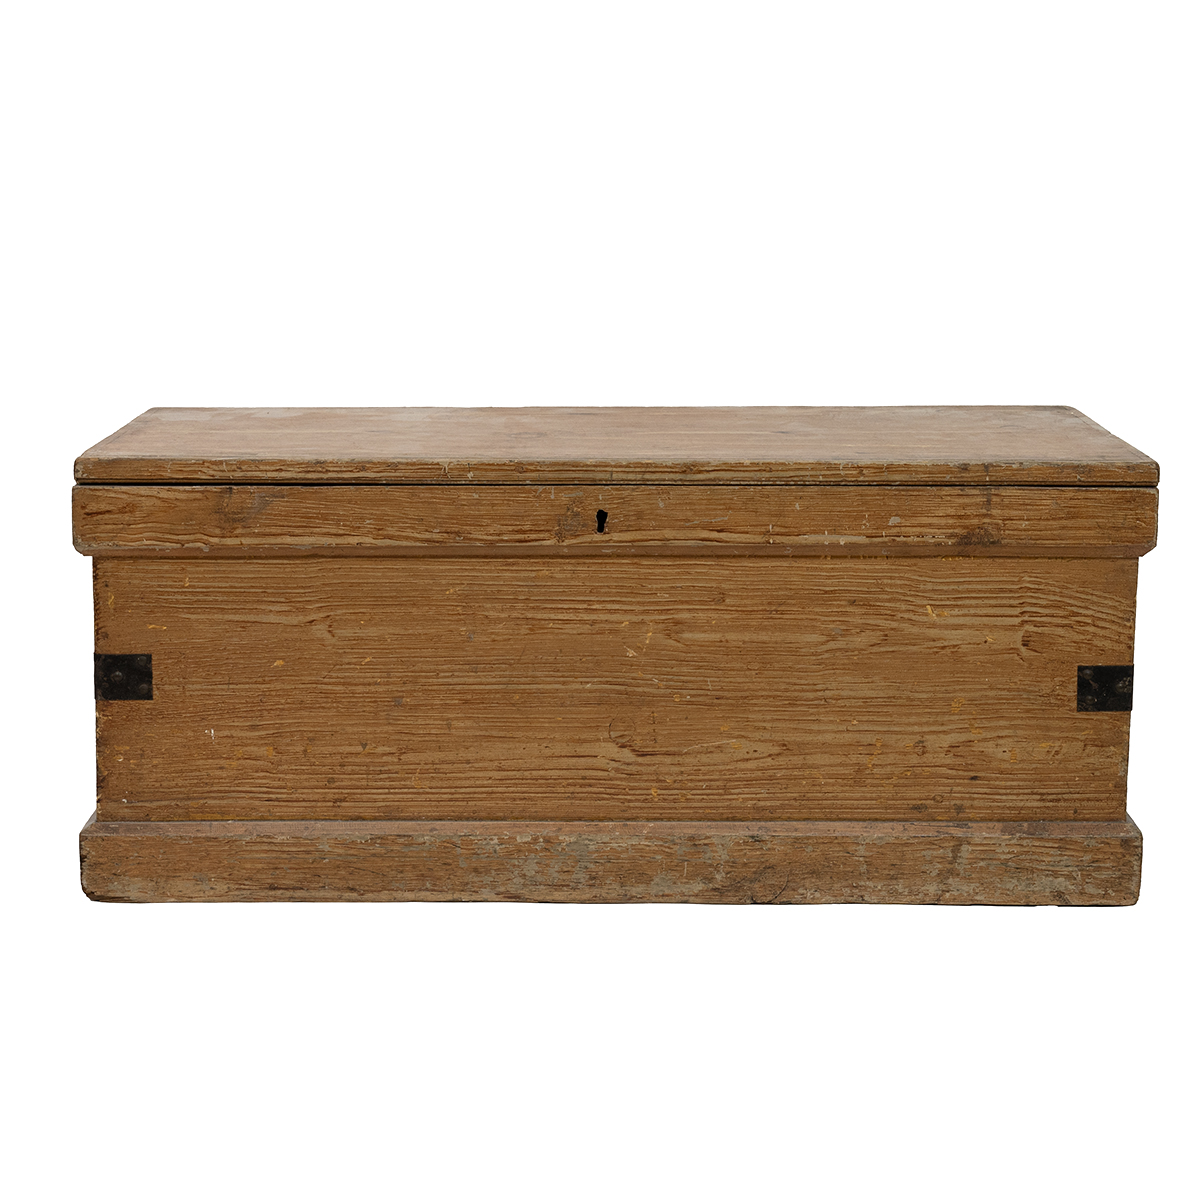 Victorian pine blanket box with painted wood grain finish. Iron handles to side, opens to single ...